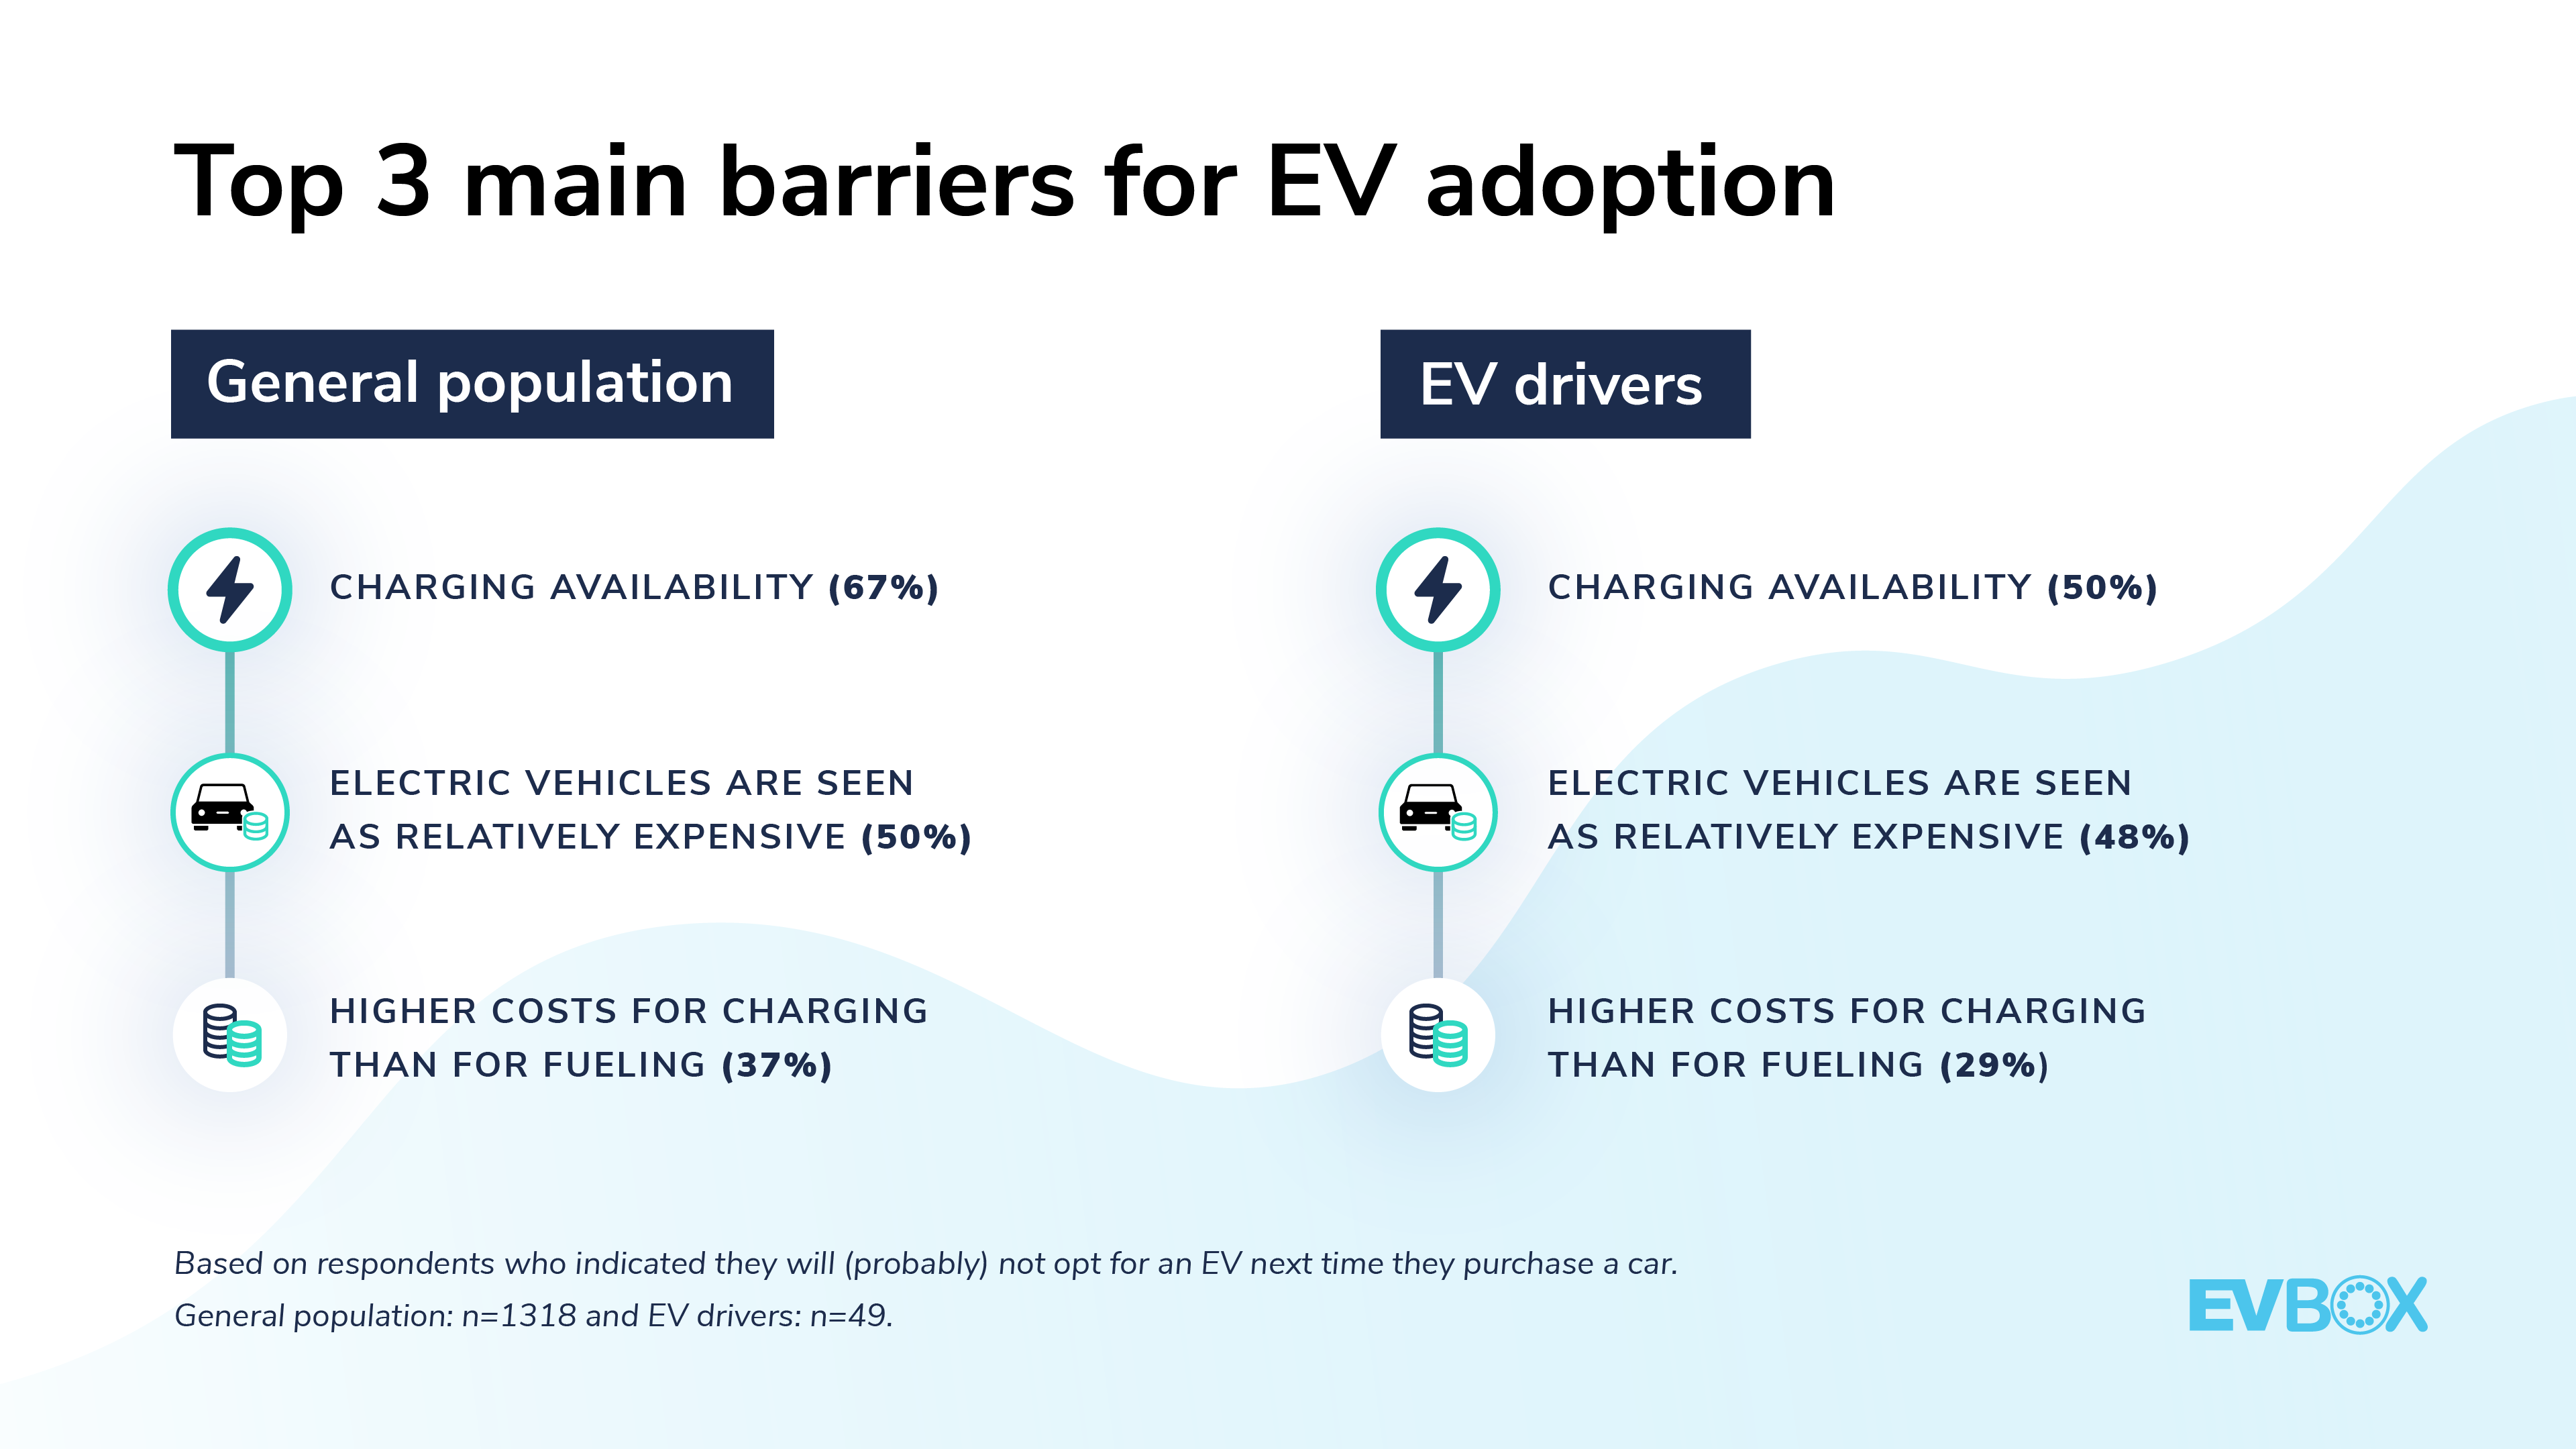 The EVBox Mobility Monitor – U.S. barriers for EV adoption